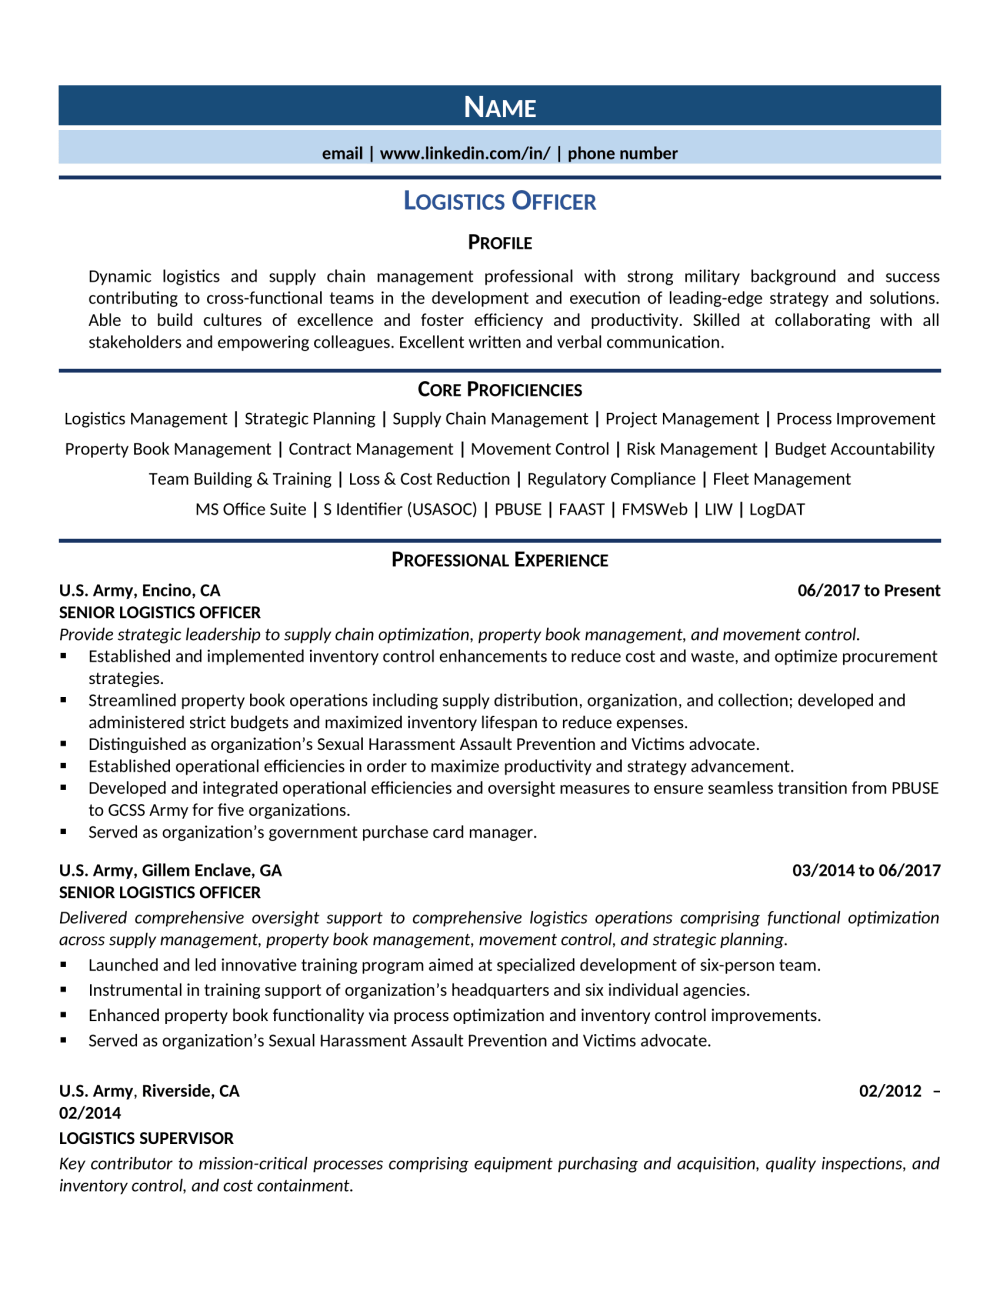 Logistics Officer Resume Example & Template for 2021 ZipJob